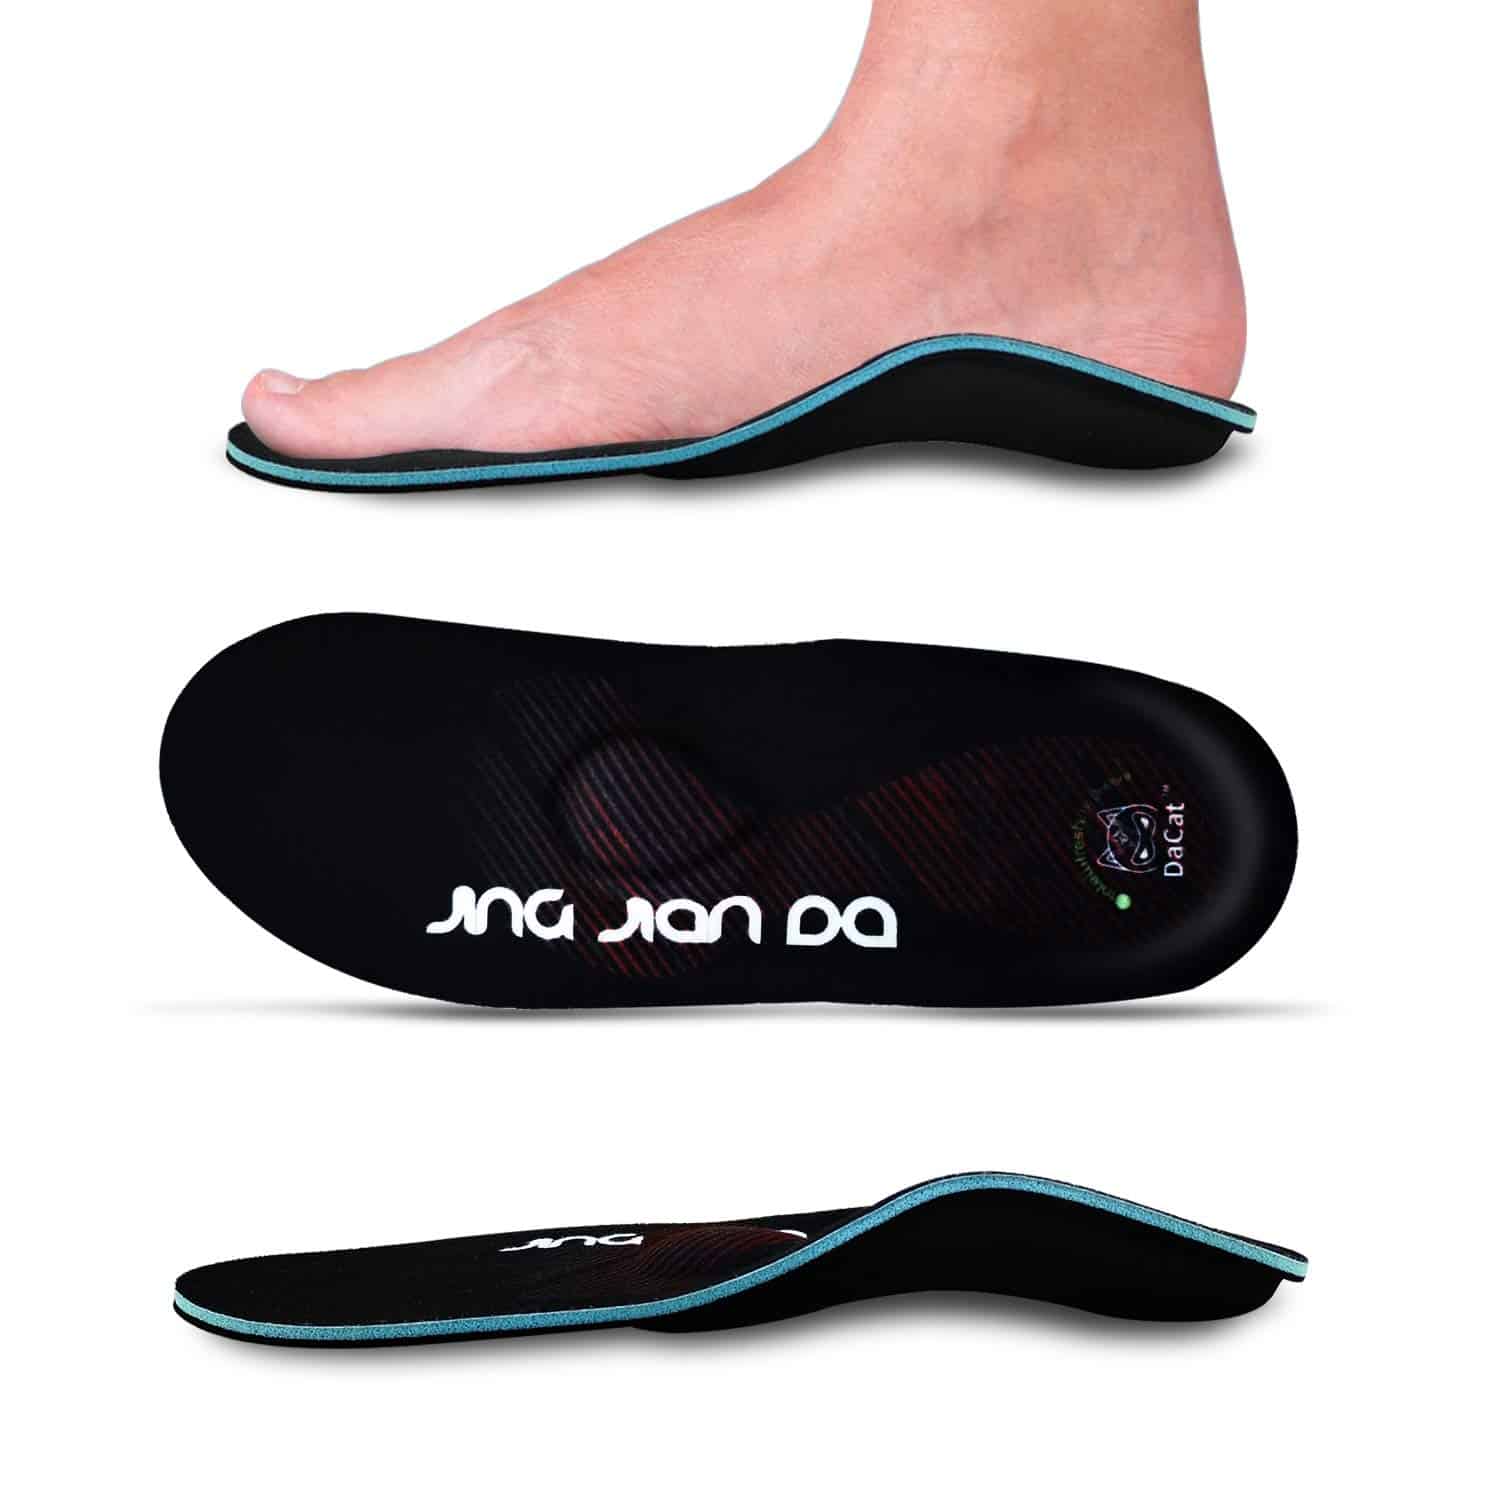 Choosing the right insole for flat feet